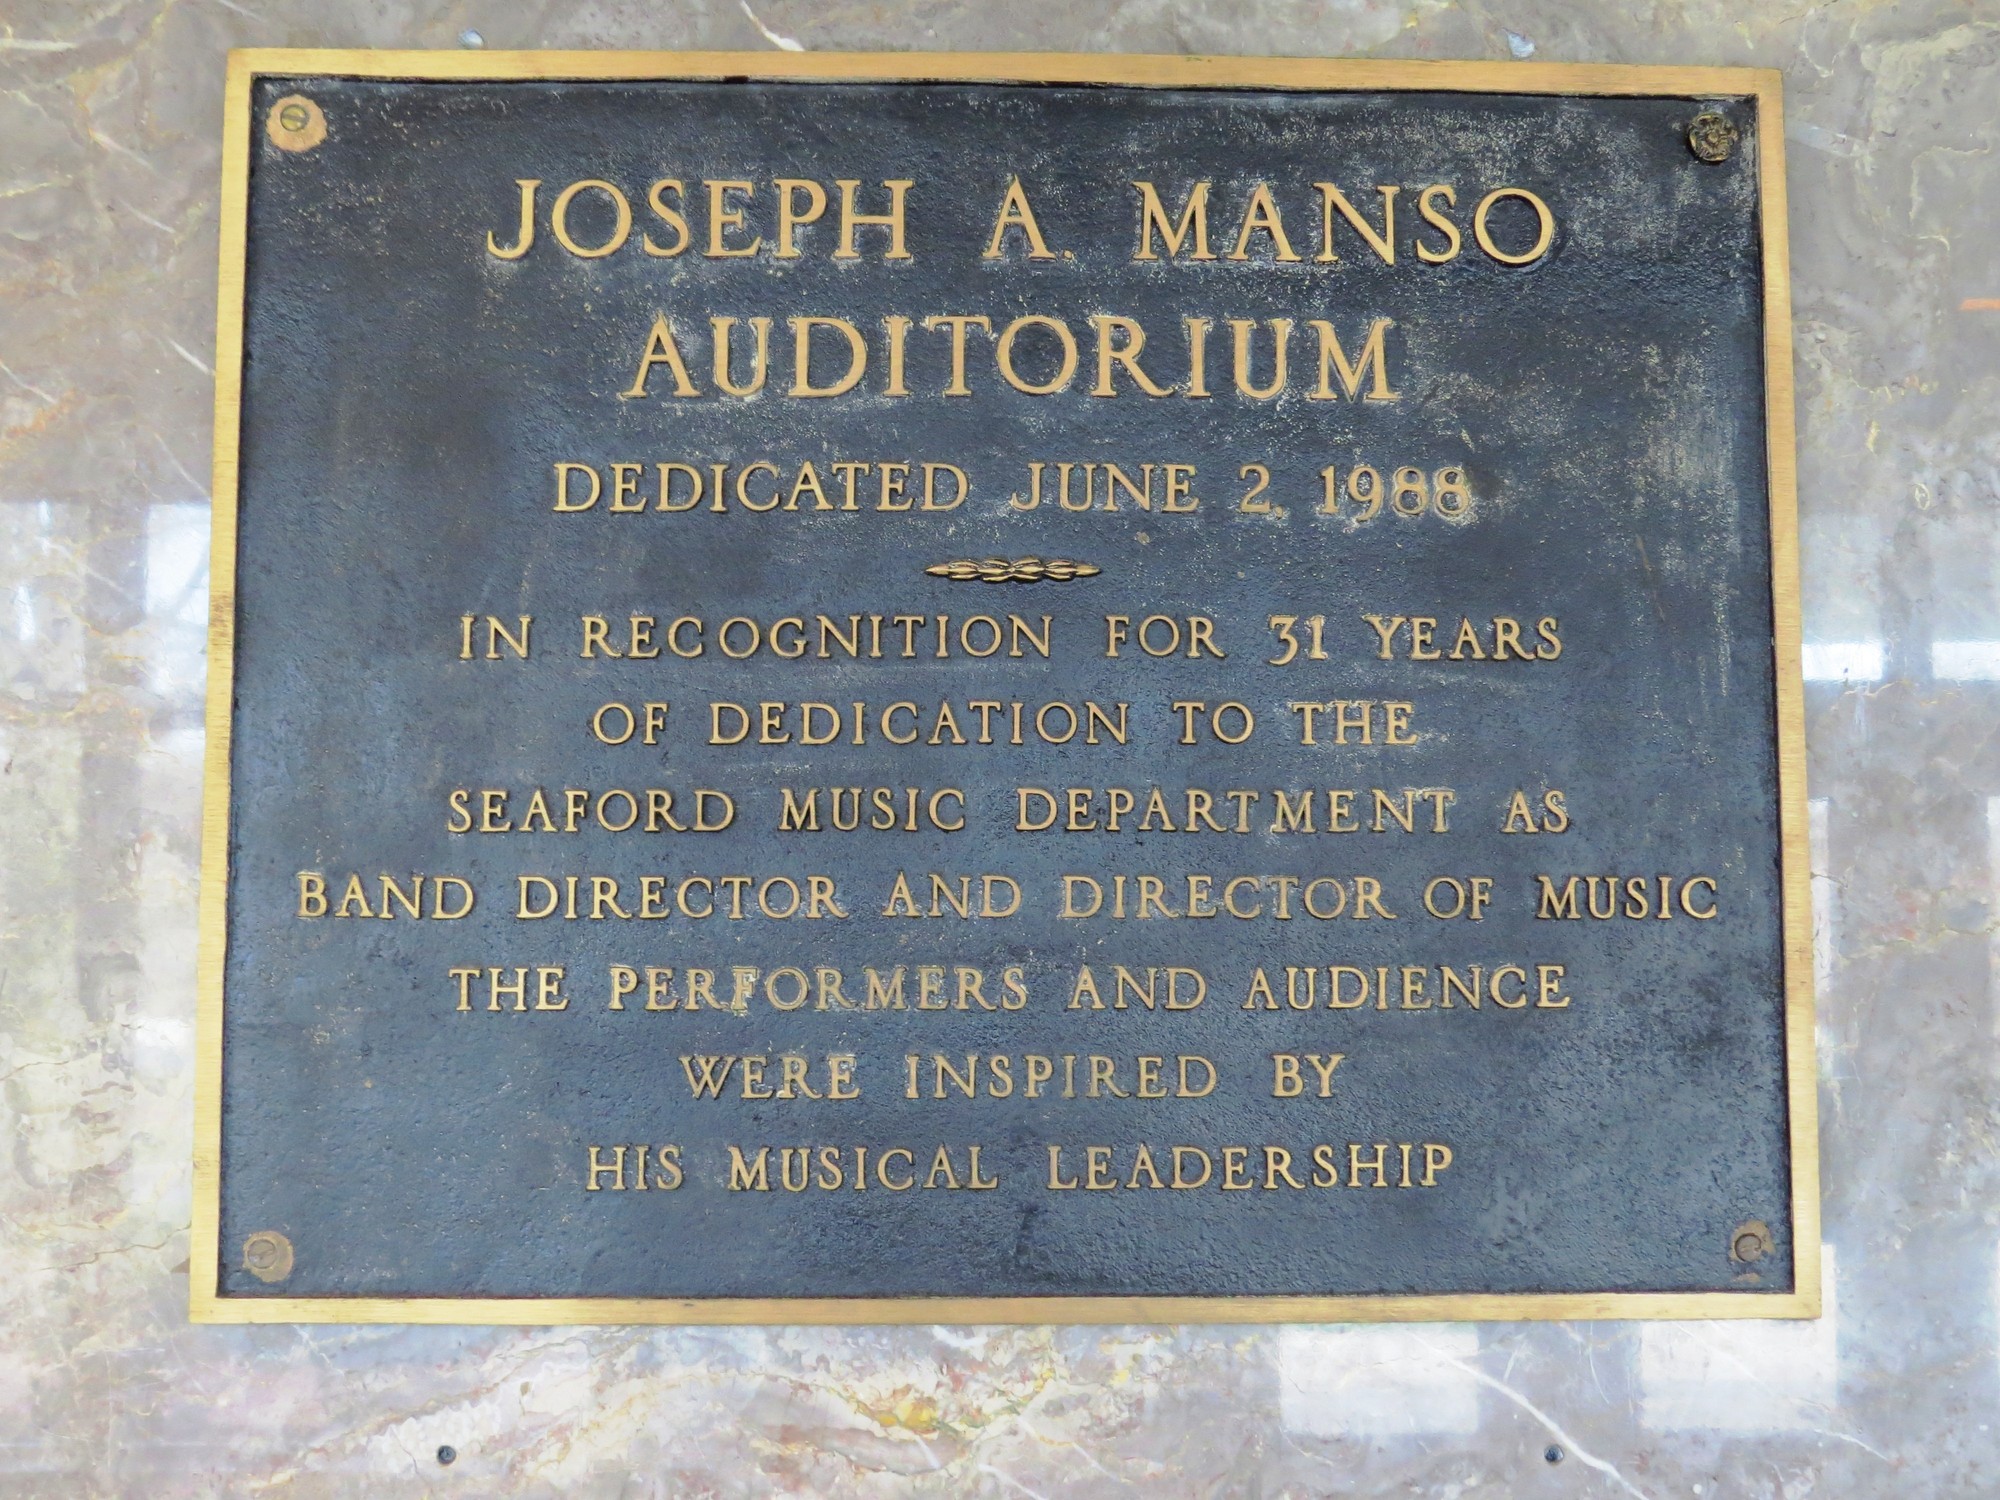 The Seaford High School auditorium was renamed in Joseph Manso’s honor upon his retirement from the district in 1988.